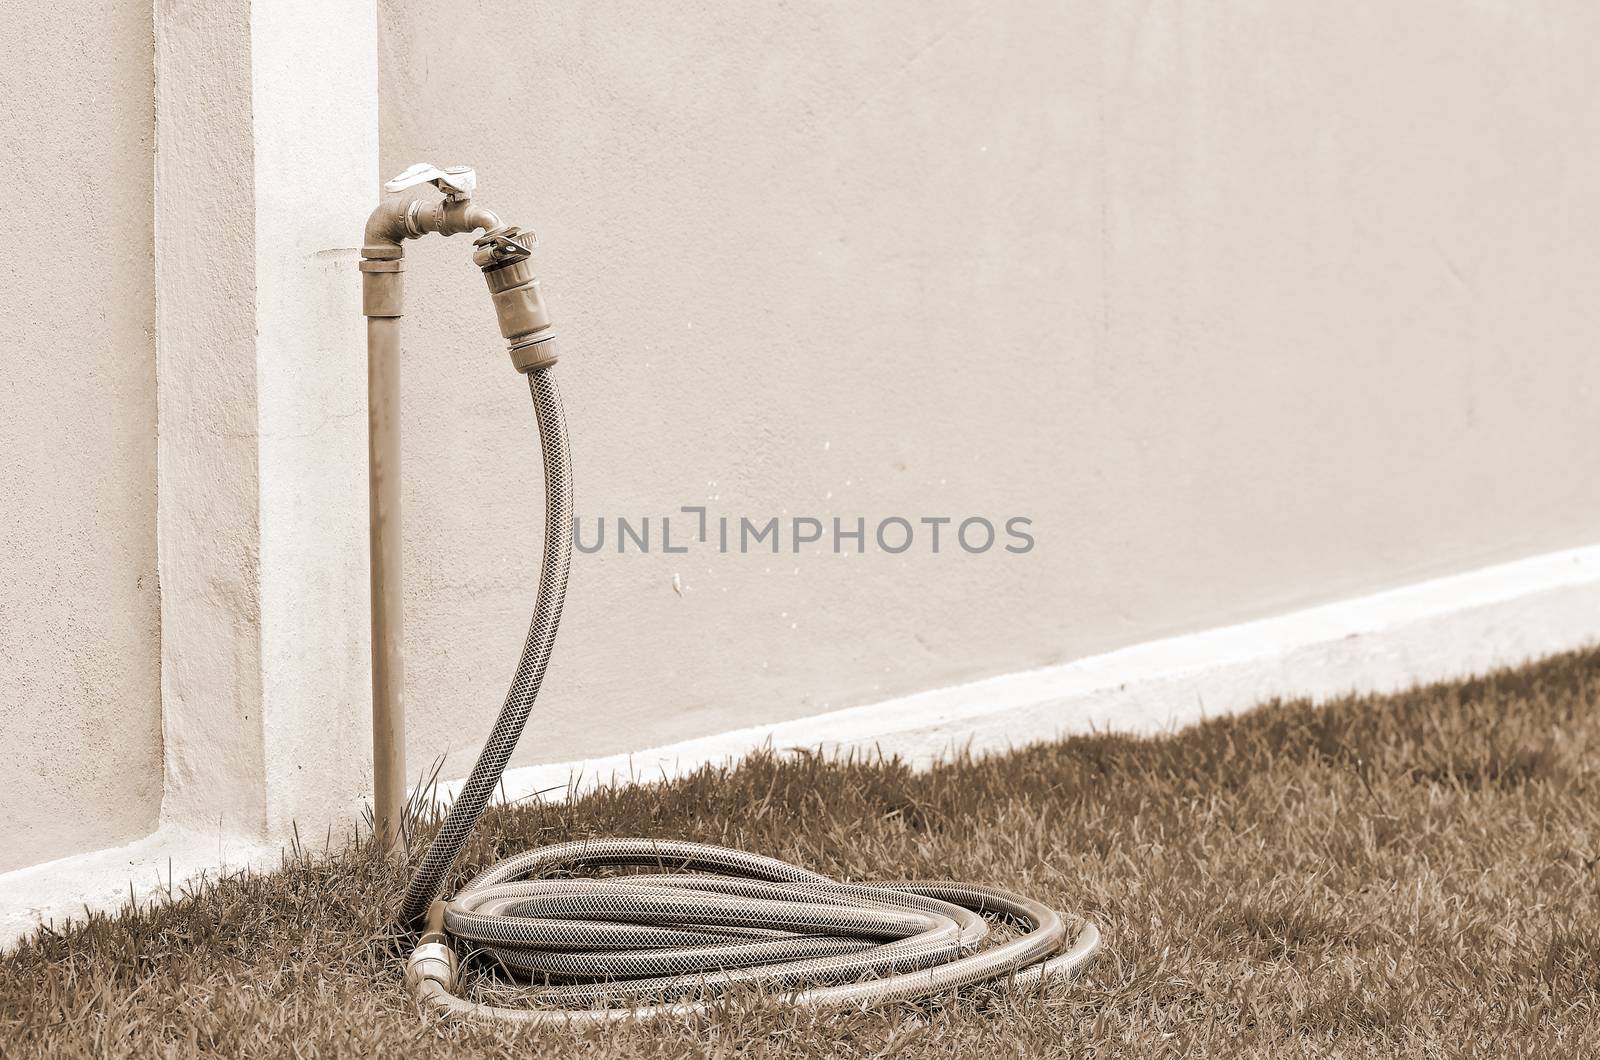 Reel of hose pipe and spraying head in sepia tone